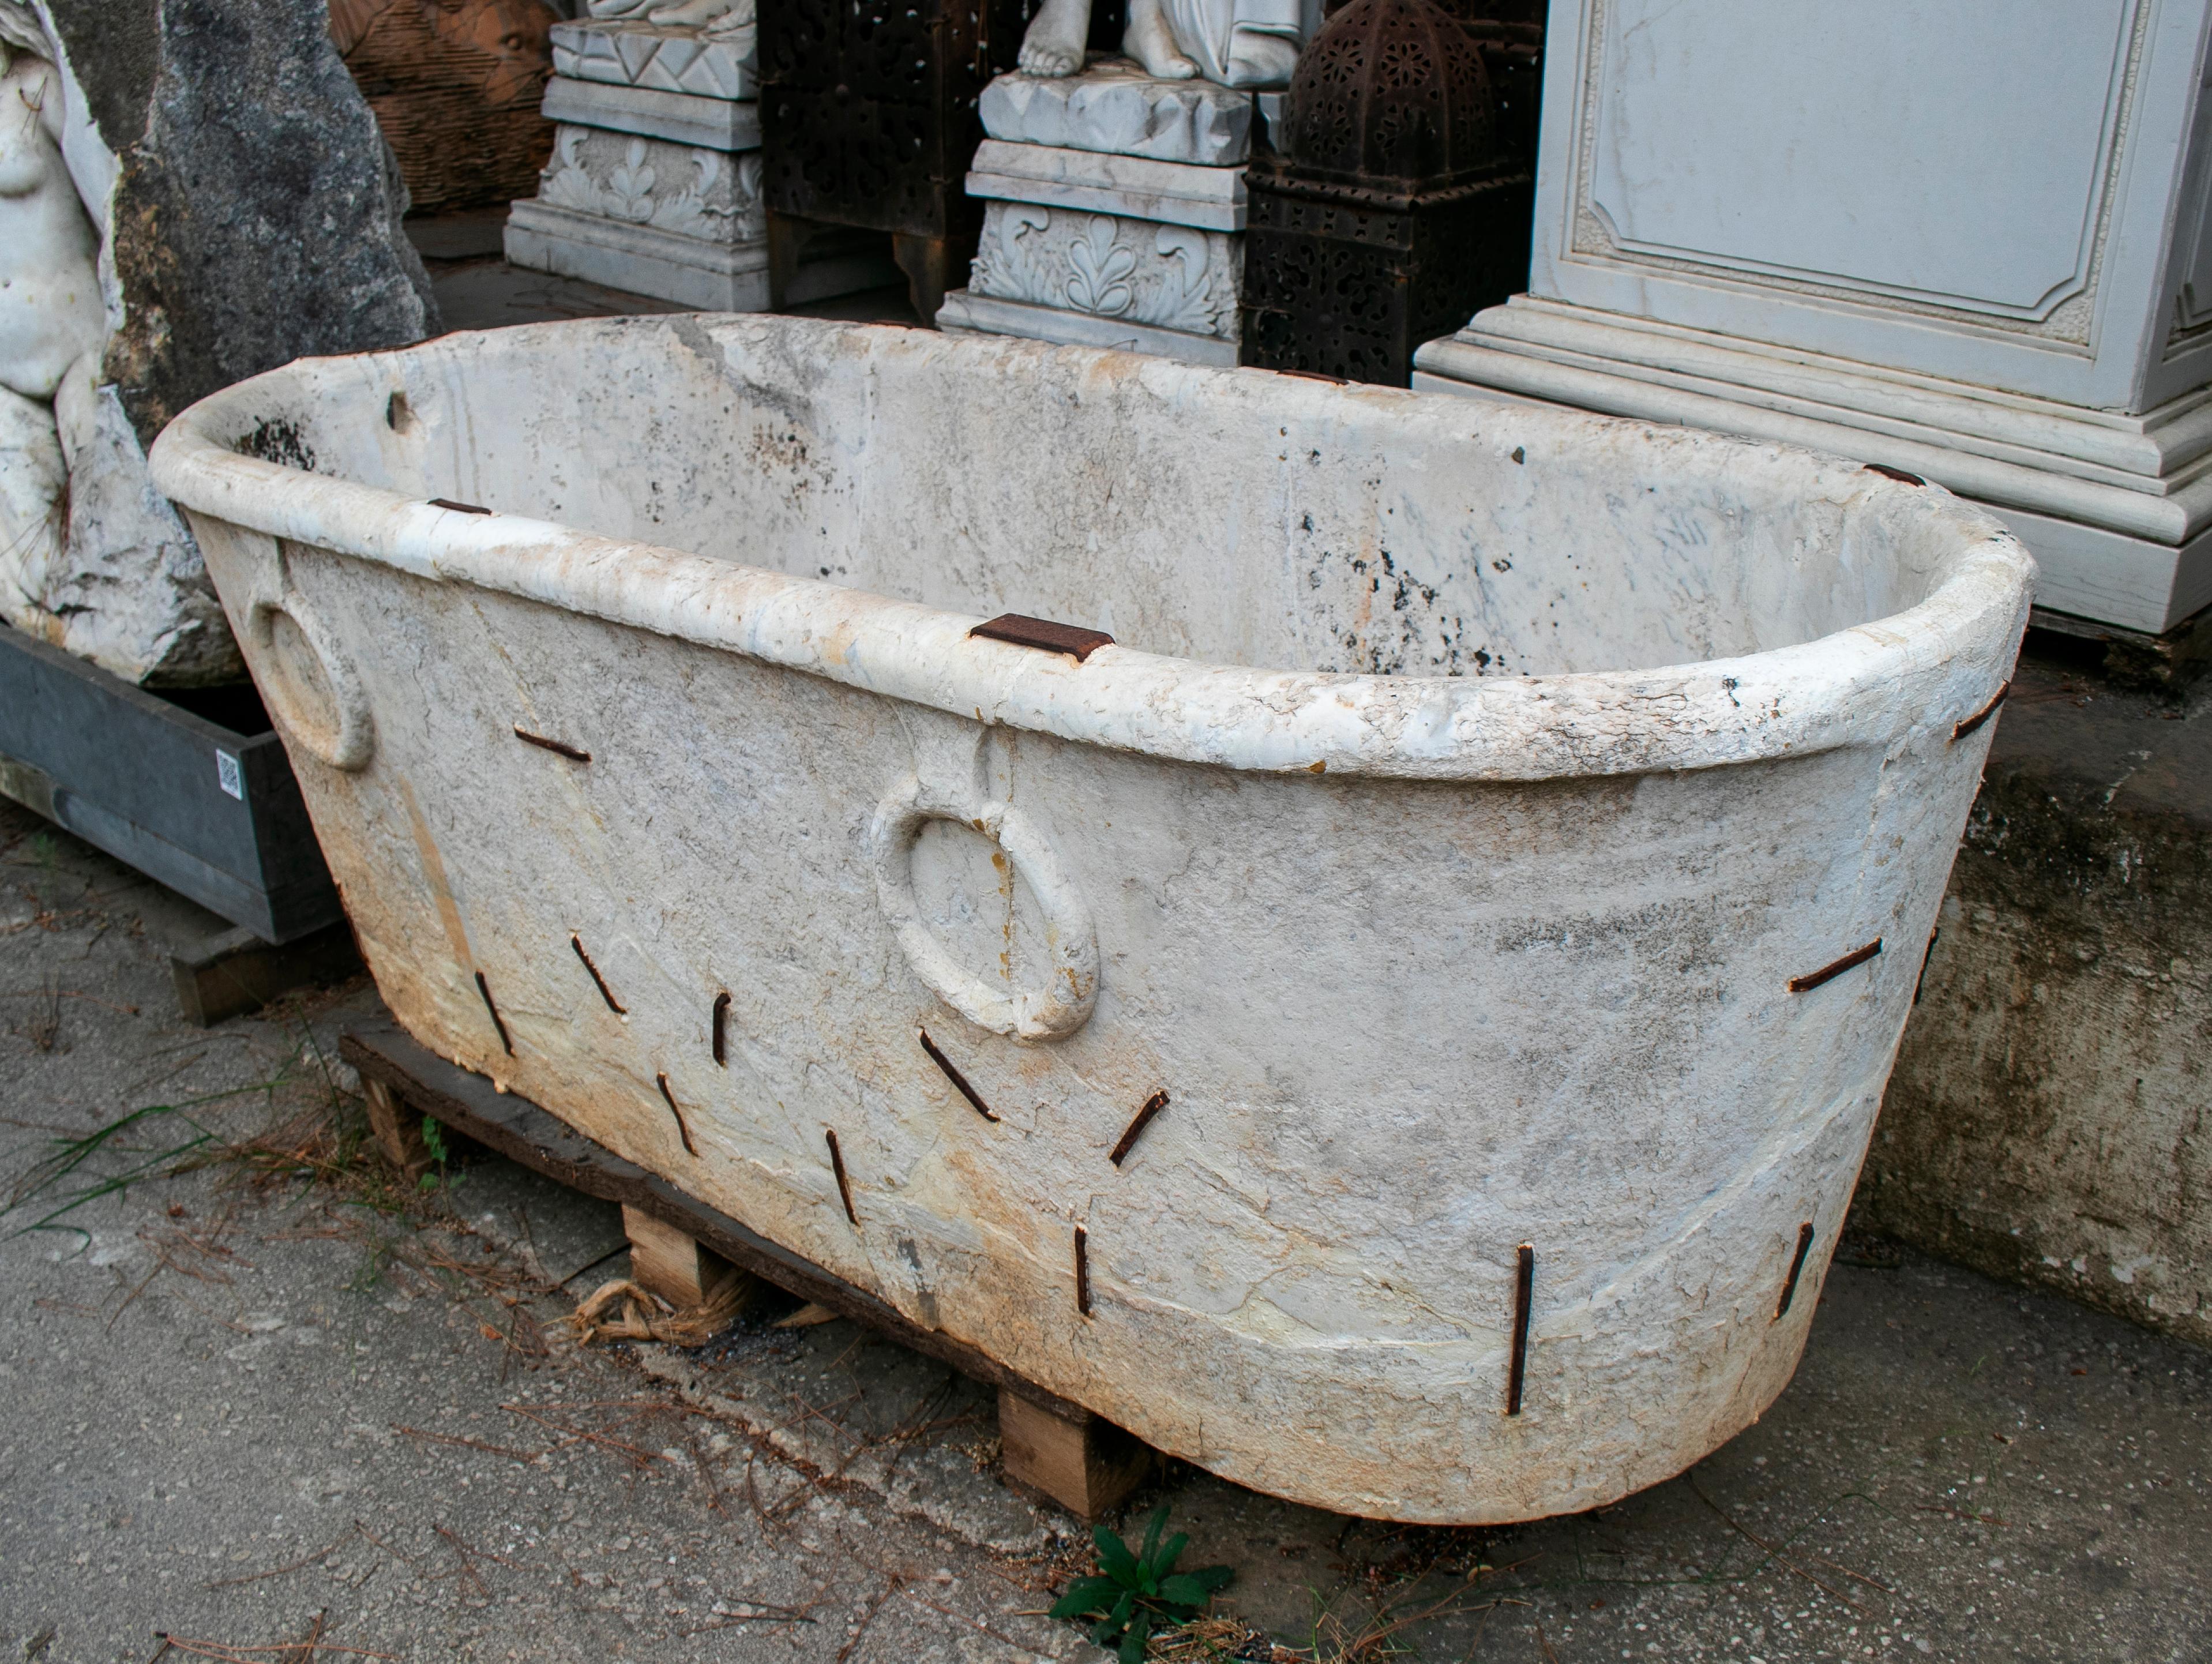 19th century Spanish one block solid marble bath with rings, repaired and restored using antique iron grapples. 

